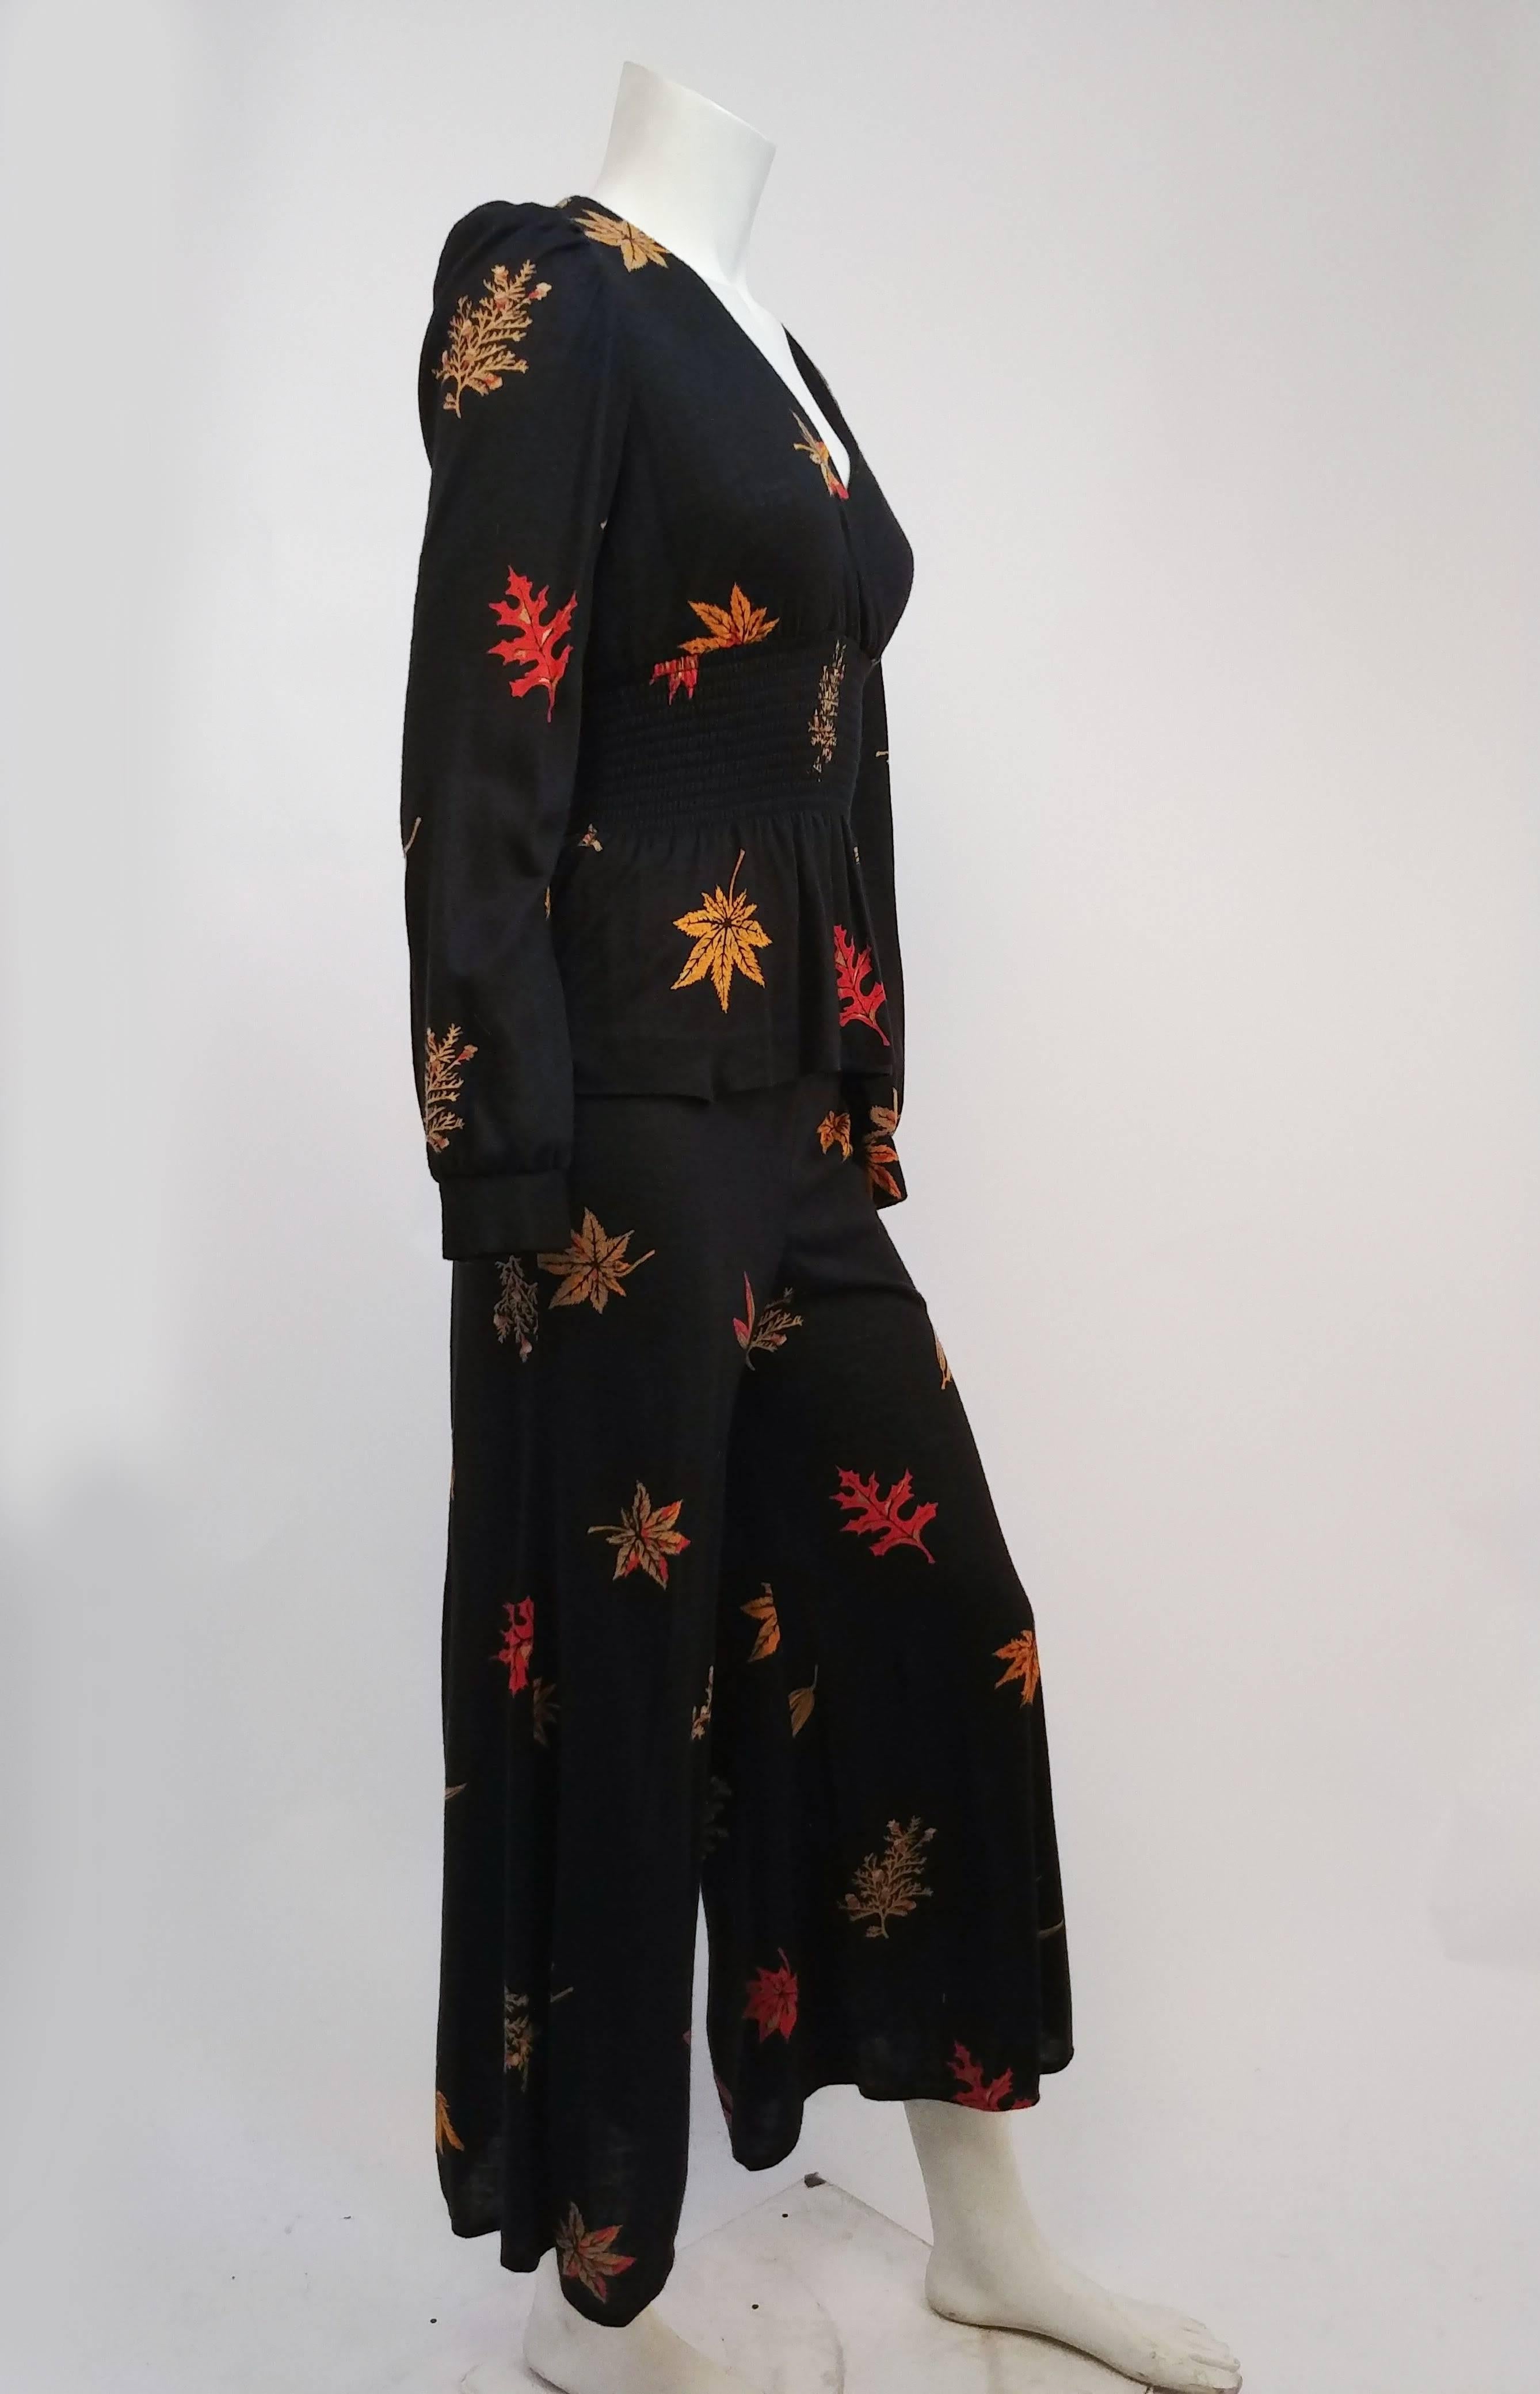 Black 1970s Knit Two Piece Top & Pant w/ Printed Maple Leaves For Sale